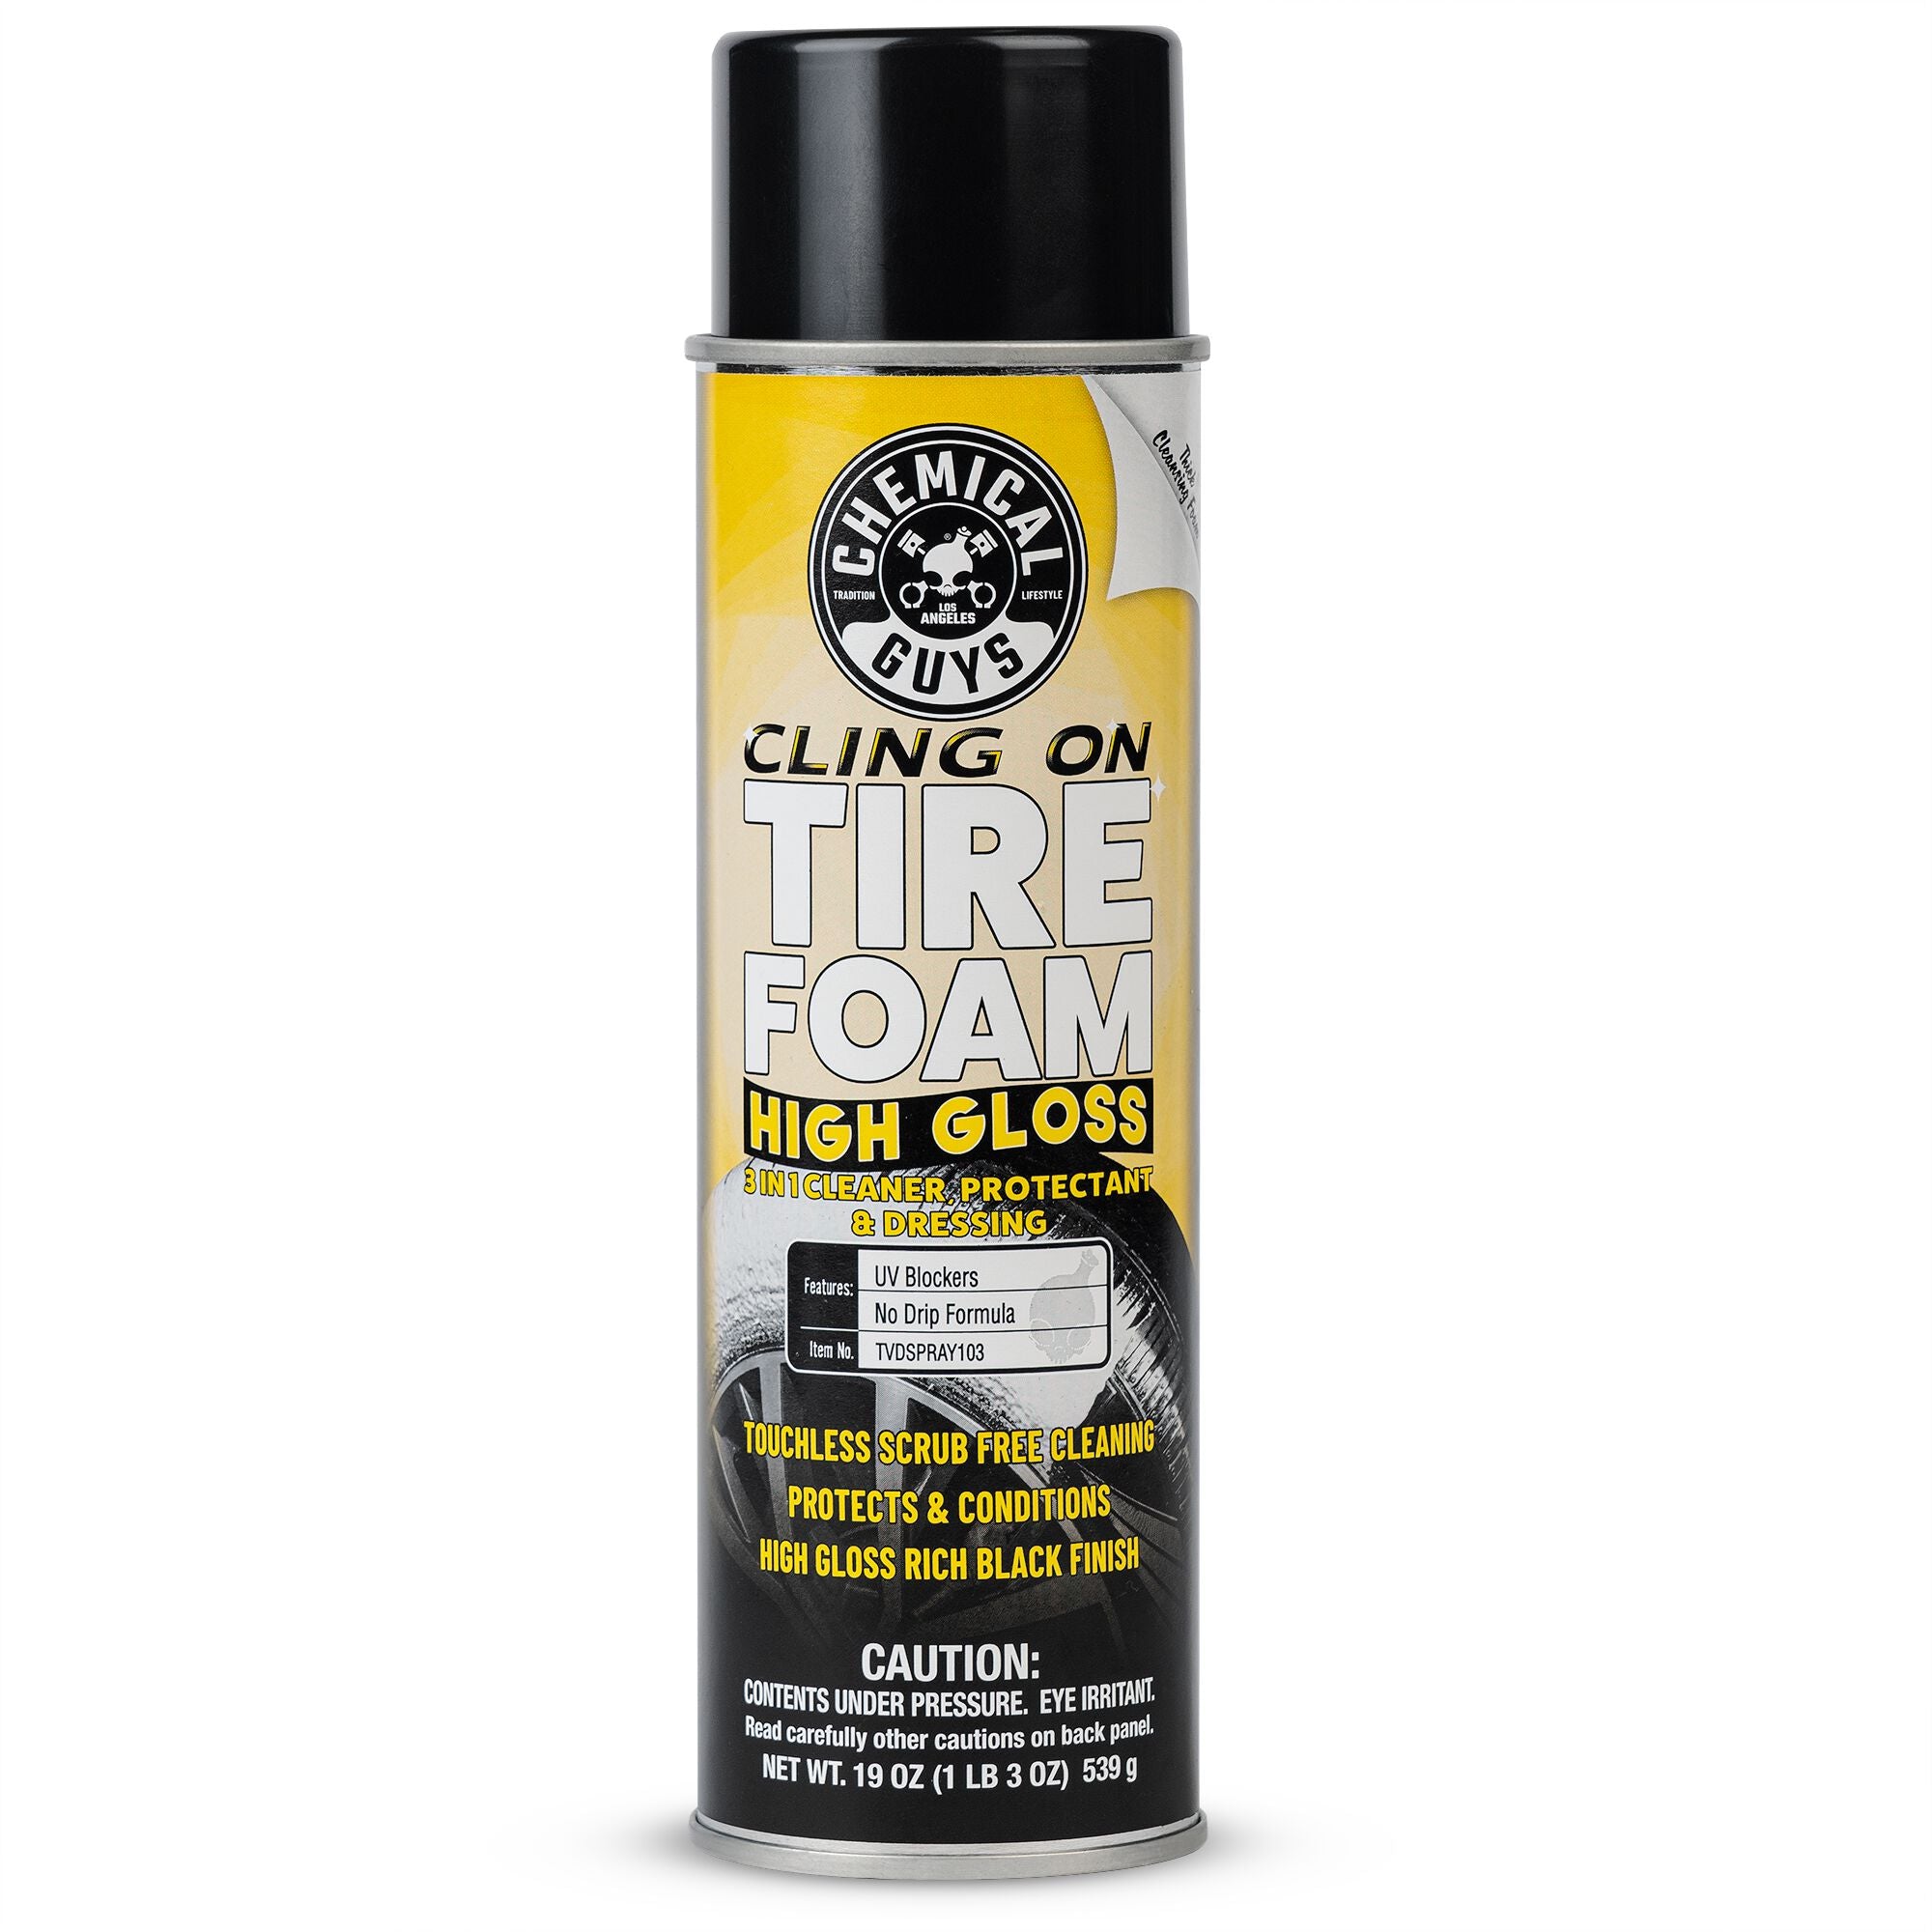 Cling On Tire Foam High Gloss 3 in 1 Cleaner, Protectant